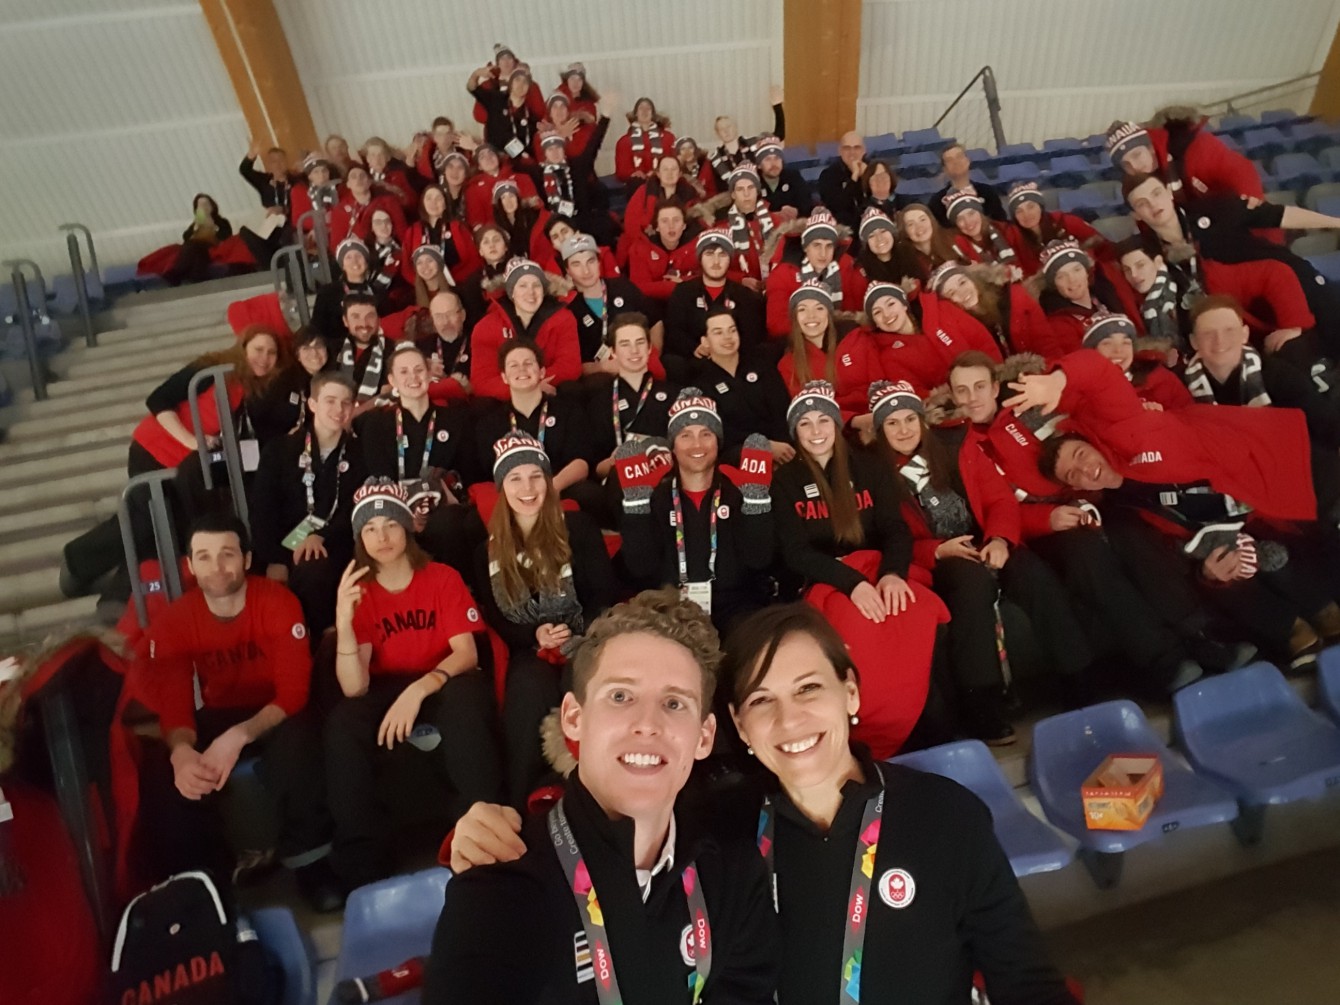 Chef de Mission Isabelle Charest with youth ambassador Eric Mitchell and Team Canada at the 2016 Winter Youth Olympic Games